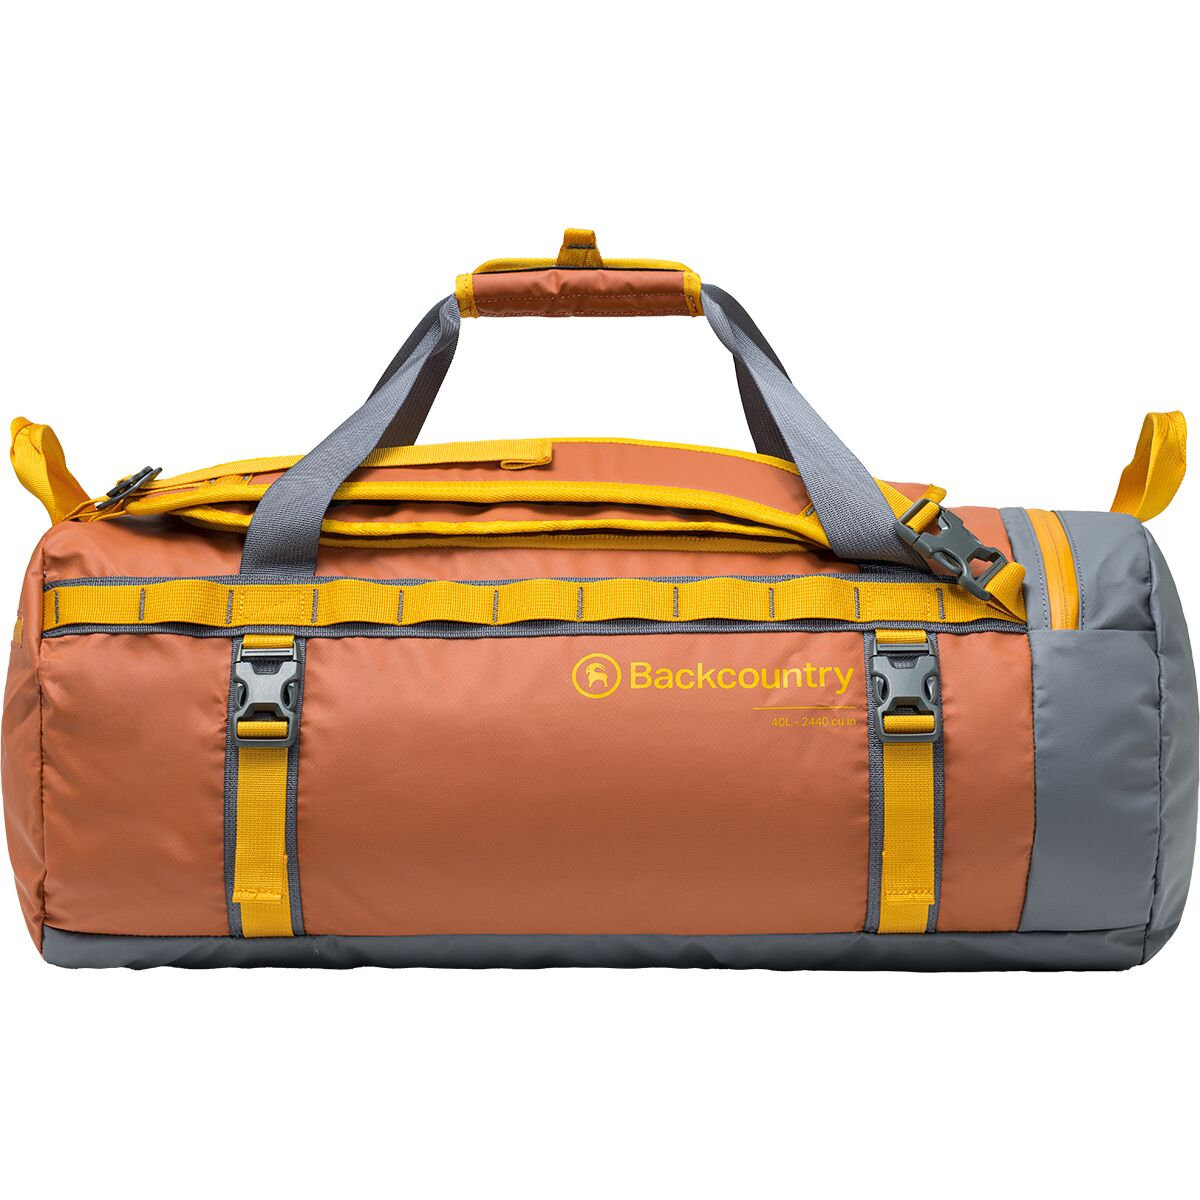 Bachelor opleiding Zo veel Gematigd Backcountry All Around 40L Duffel - Accessories